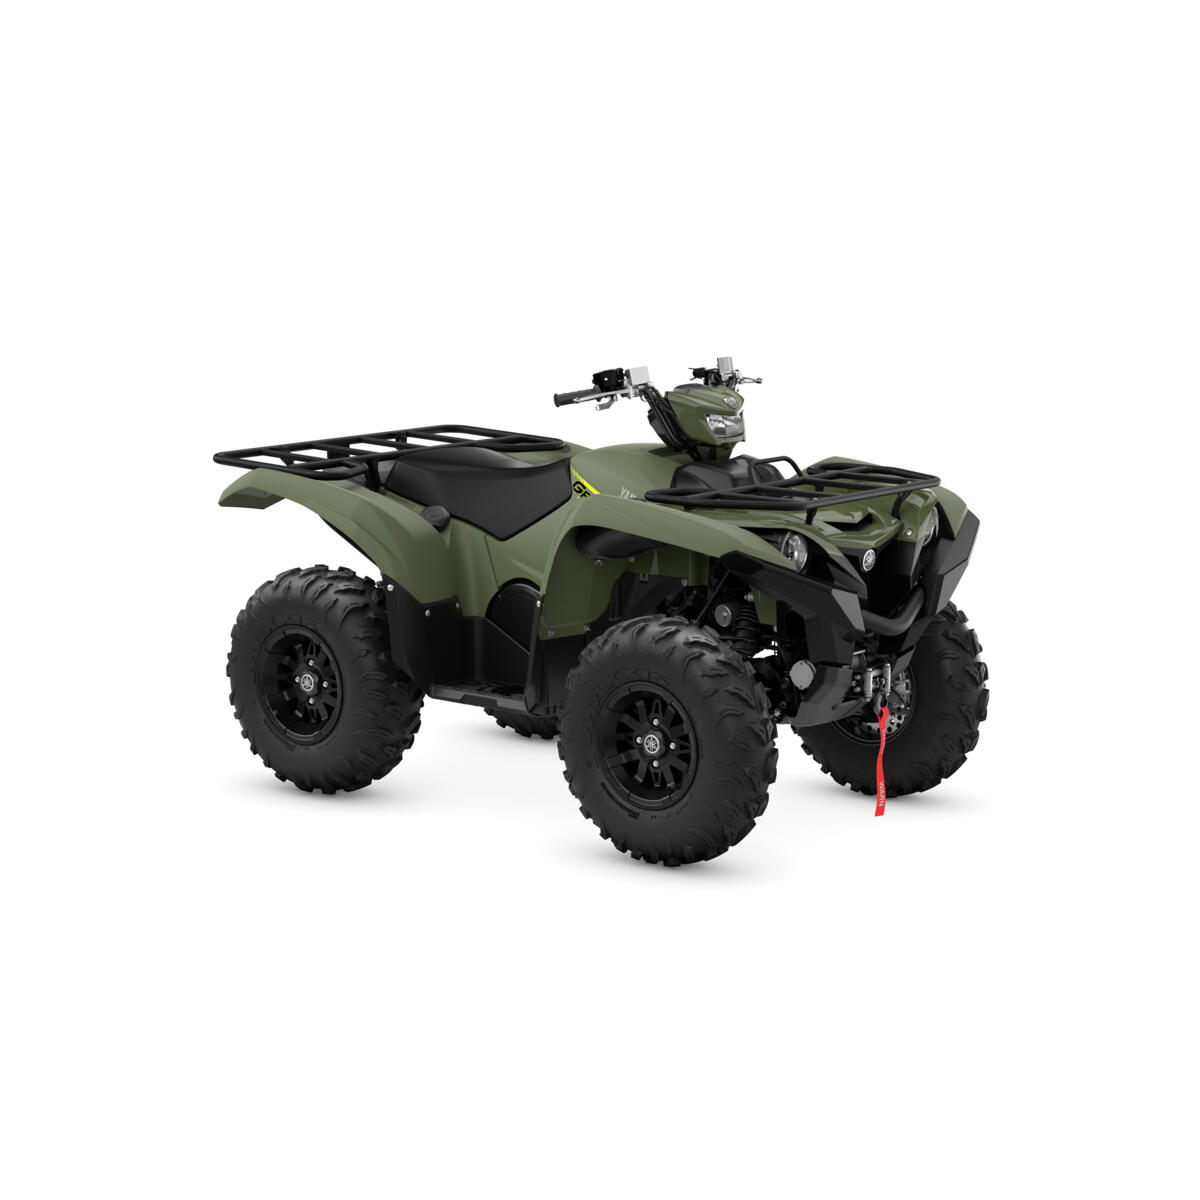 Enhance the durability of your ATV with the Protection Pack for the Kodiak 700. Pack includes: Centreframe Skidplate, Front and Rear Bash Plate, Front Rack Extension and Front Grab Bar.